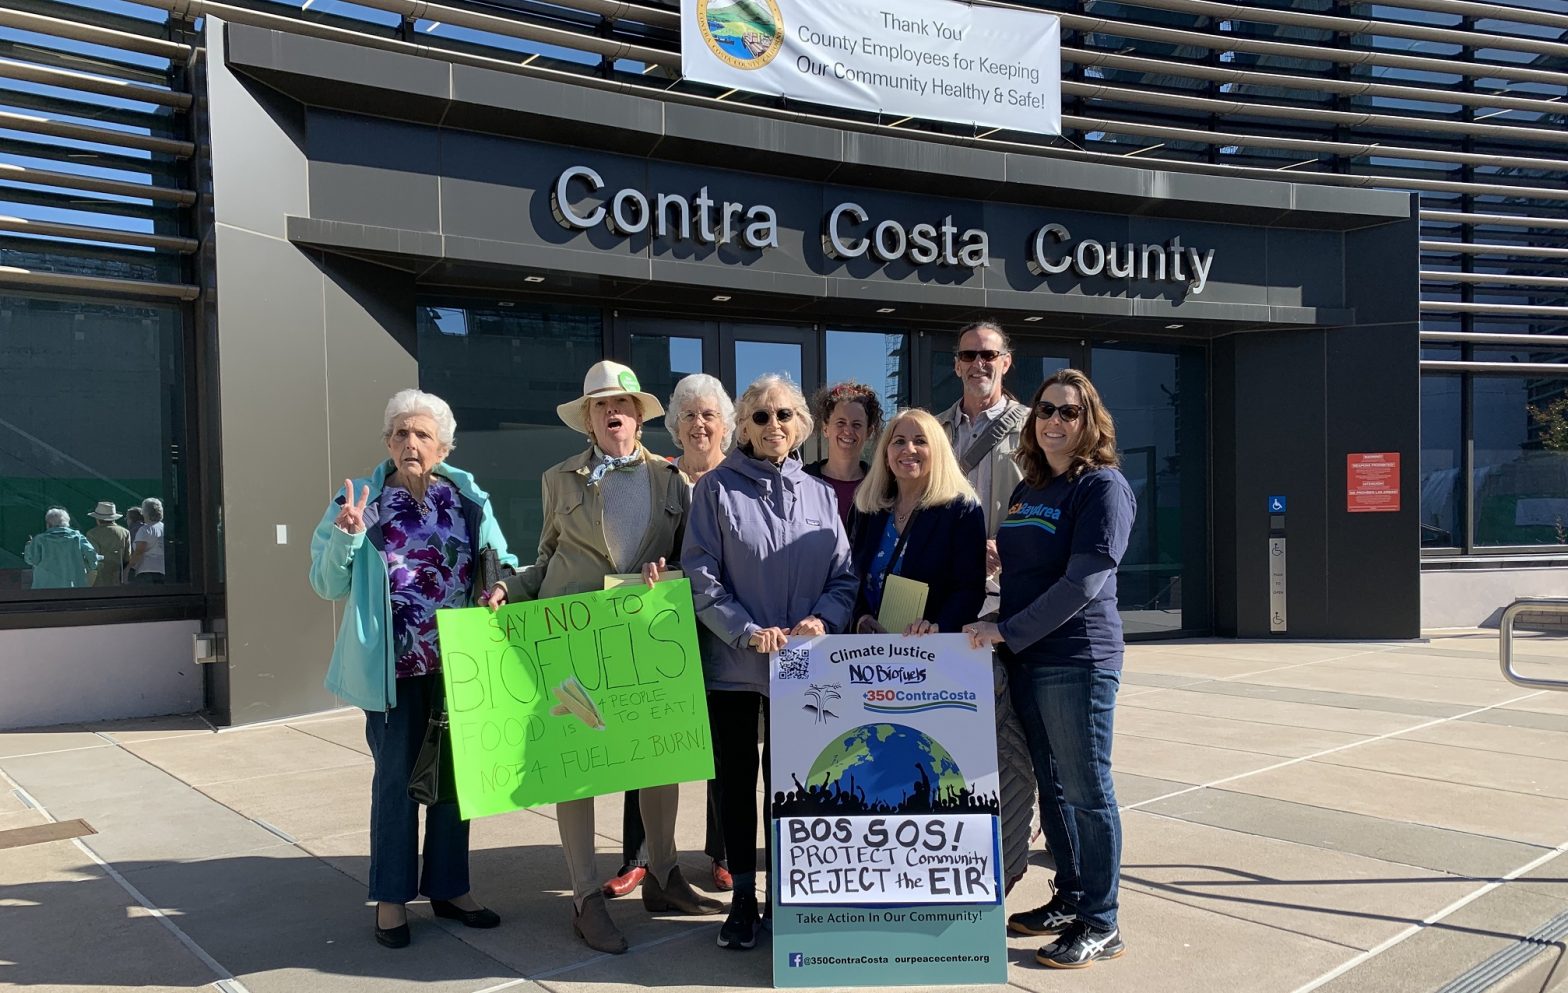 Local Policy Team volunteers demonstrating to end biofuels and local drilling at Contra Costa County headquarters